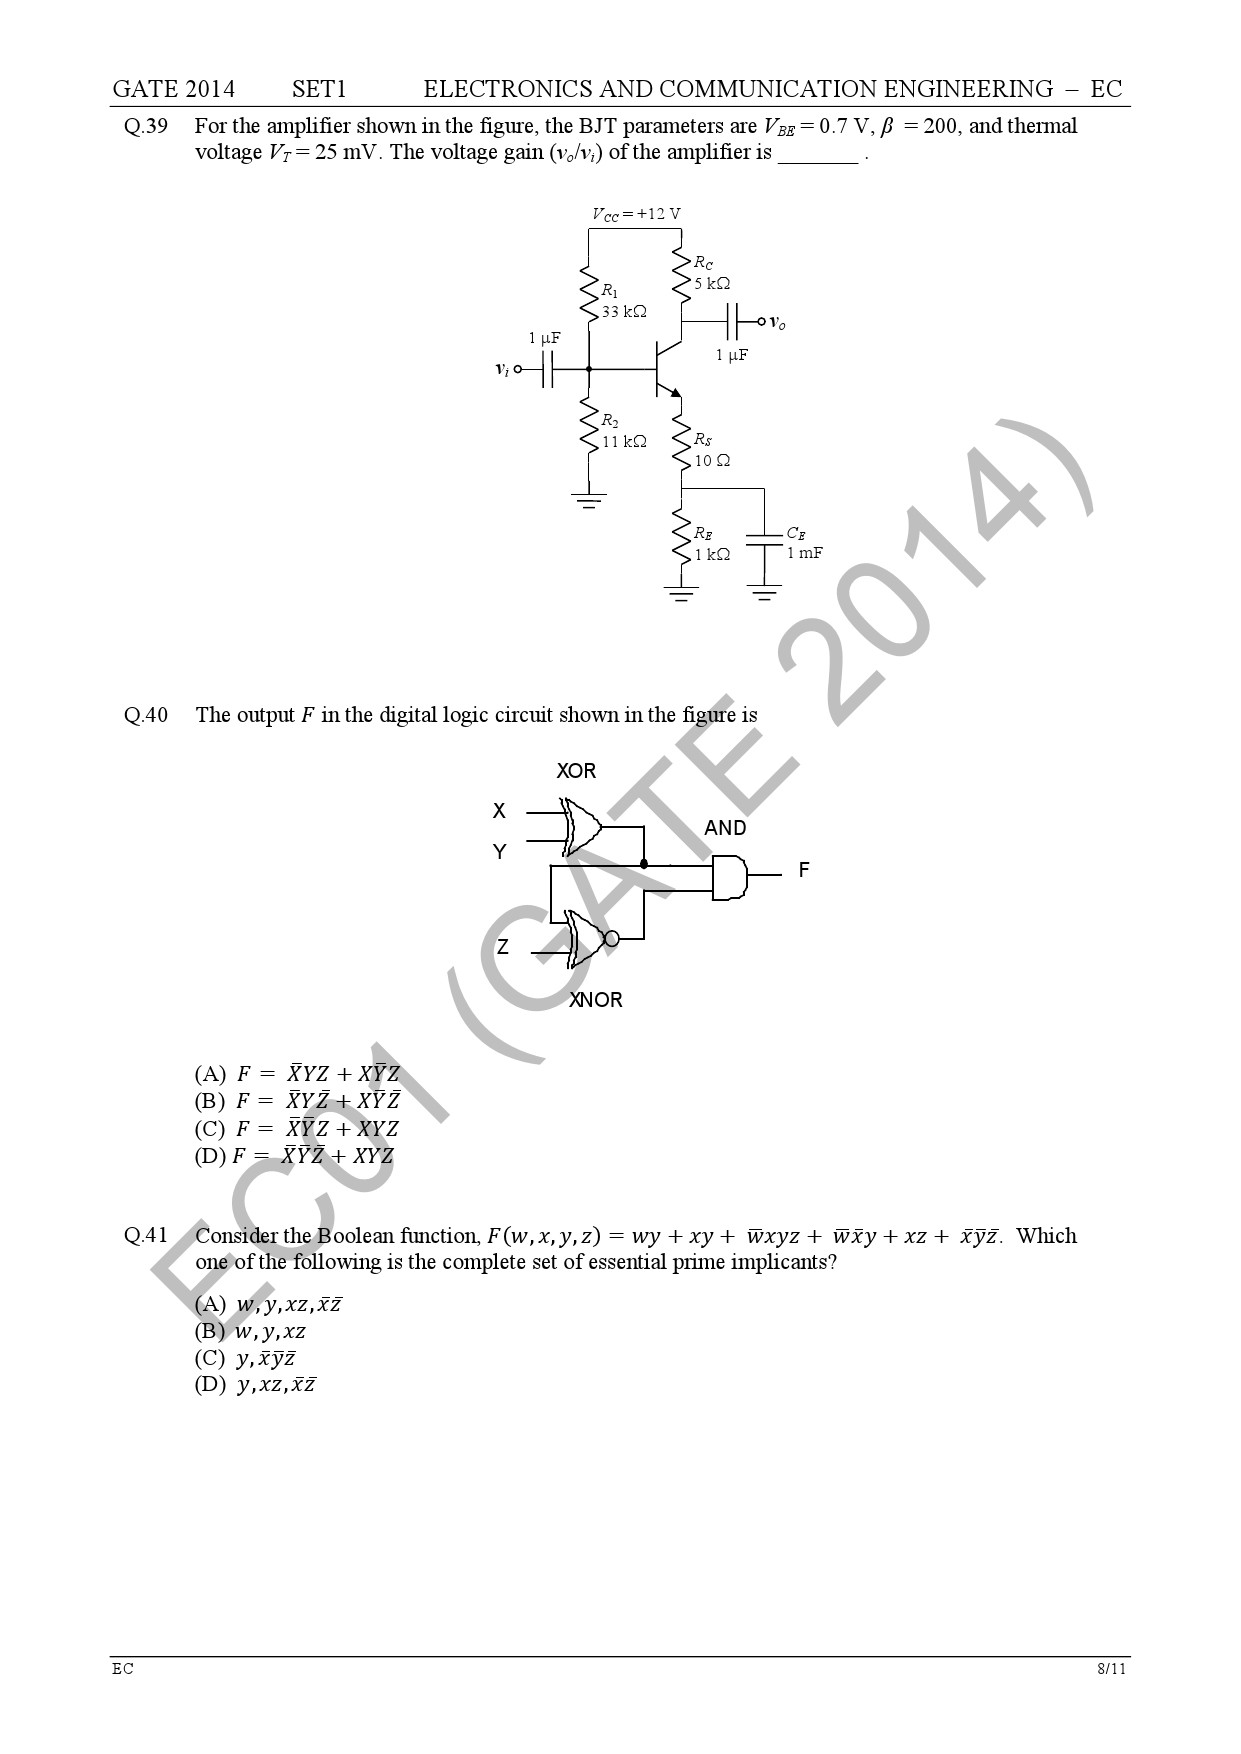 GATE Exam Question Paper 2014 Electronics and Communication Engineering Set 1 14